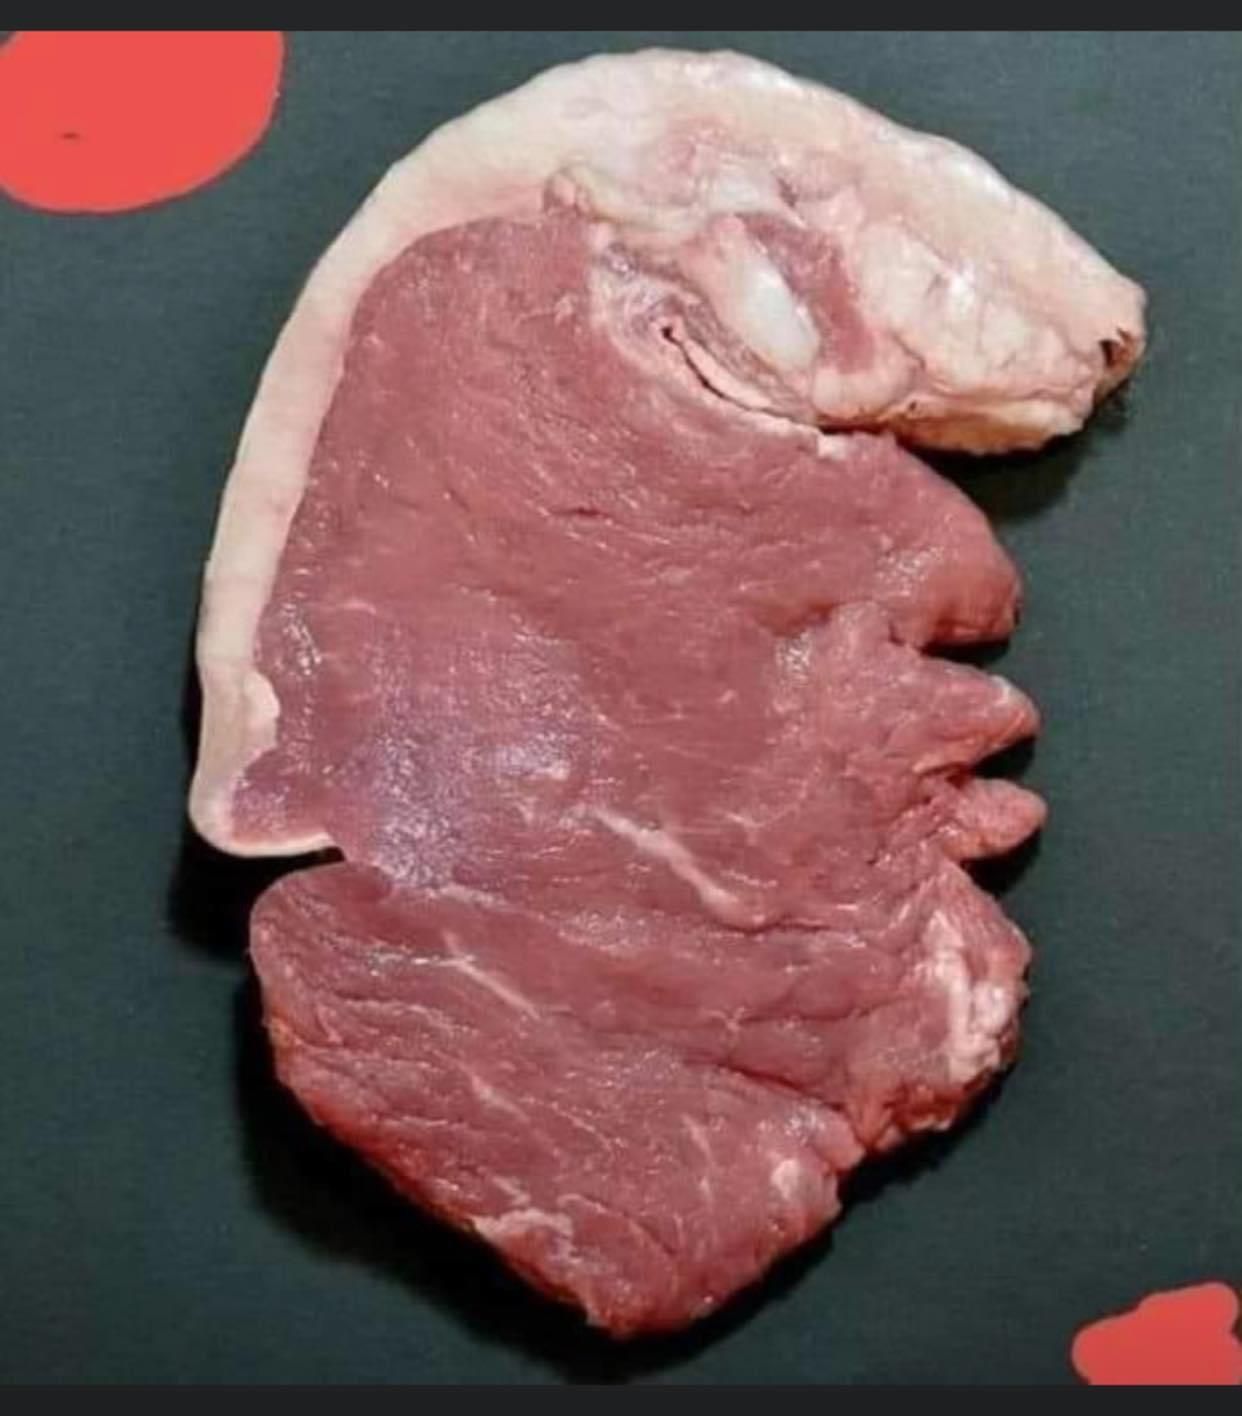 Why does this steak look like it’s about to build a wall?